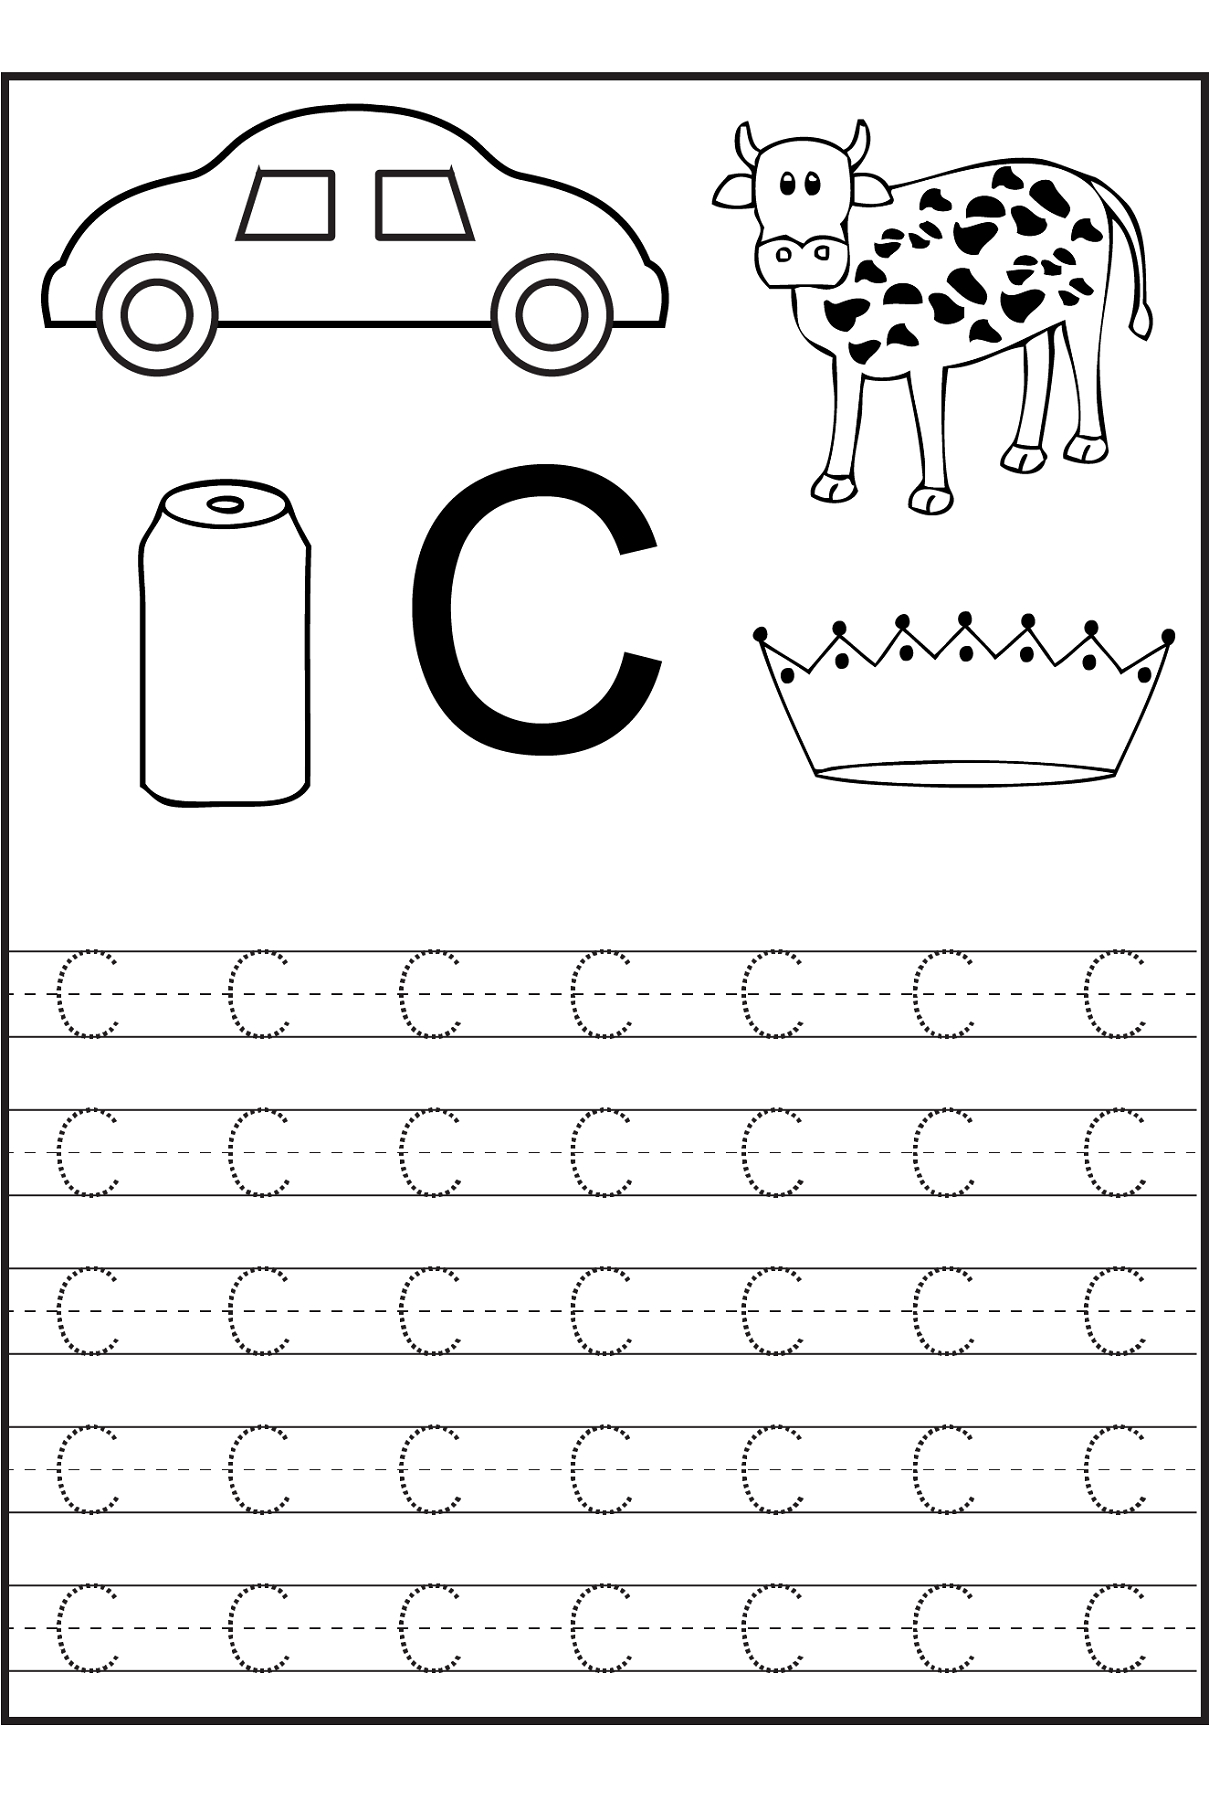 Trace The Letter C Worksheets | Alphabet And Numbers Learning - Free Printable Letter C Worksheets